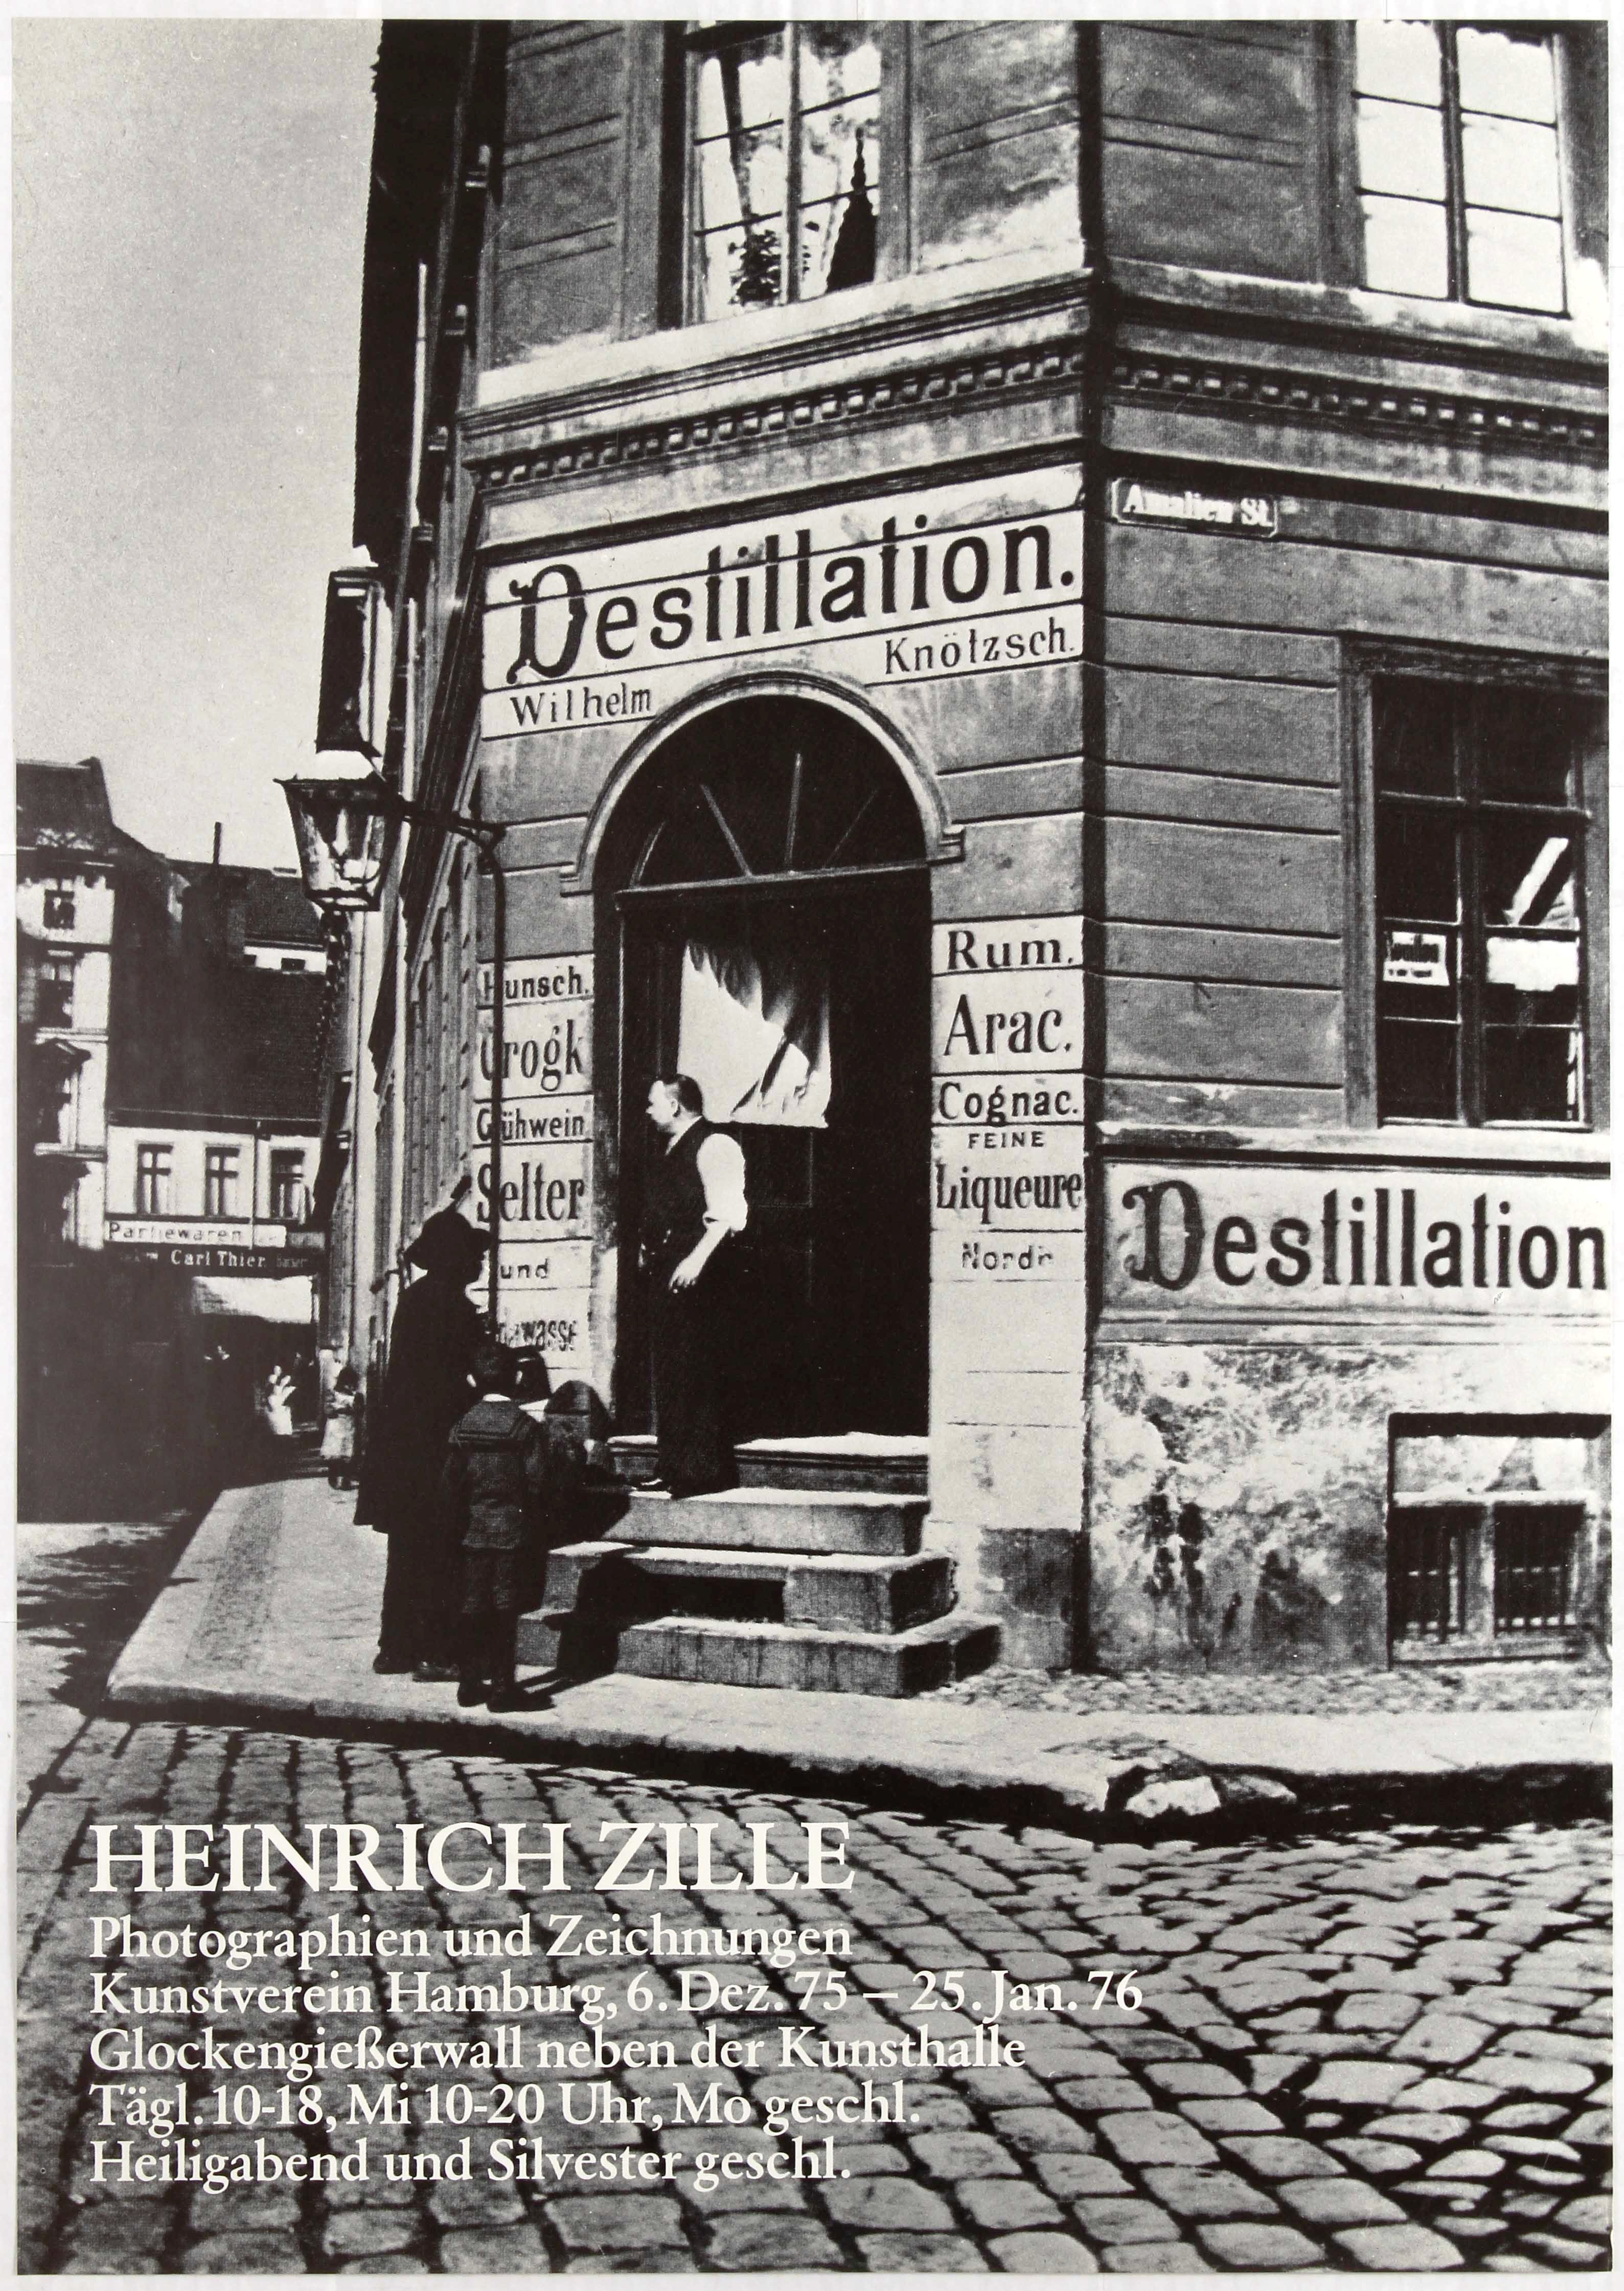 Art Exhibition Poster Photography Heartfield Man Ray Atget Vais Zille PhotoRealism Great Depression - Image 9 of 12